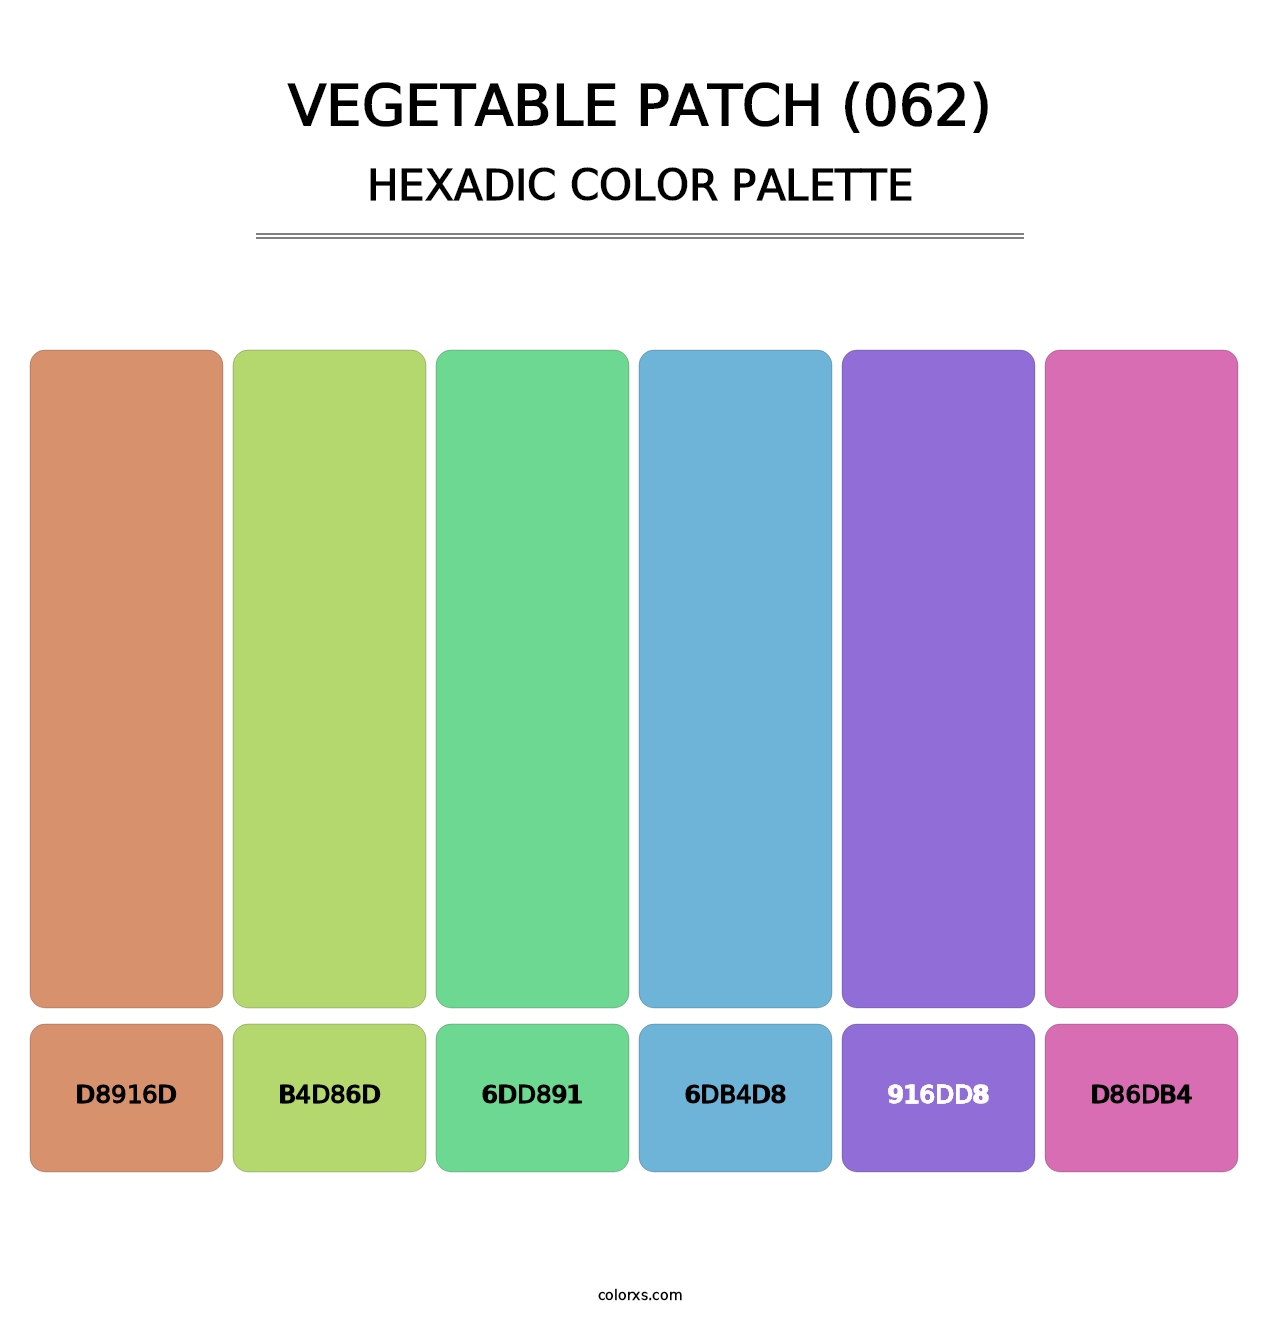 Vegetable Patch (062) - Hexadic Color Palette